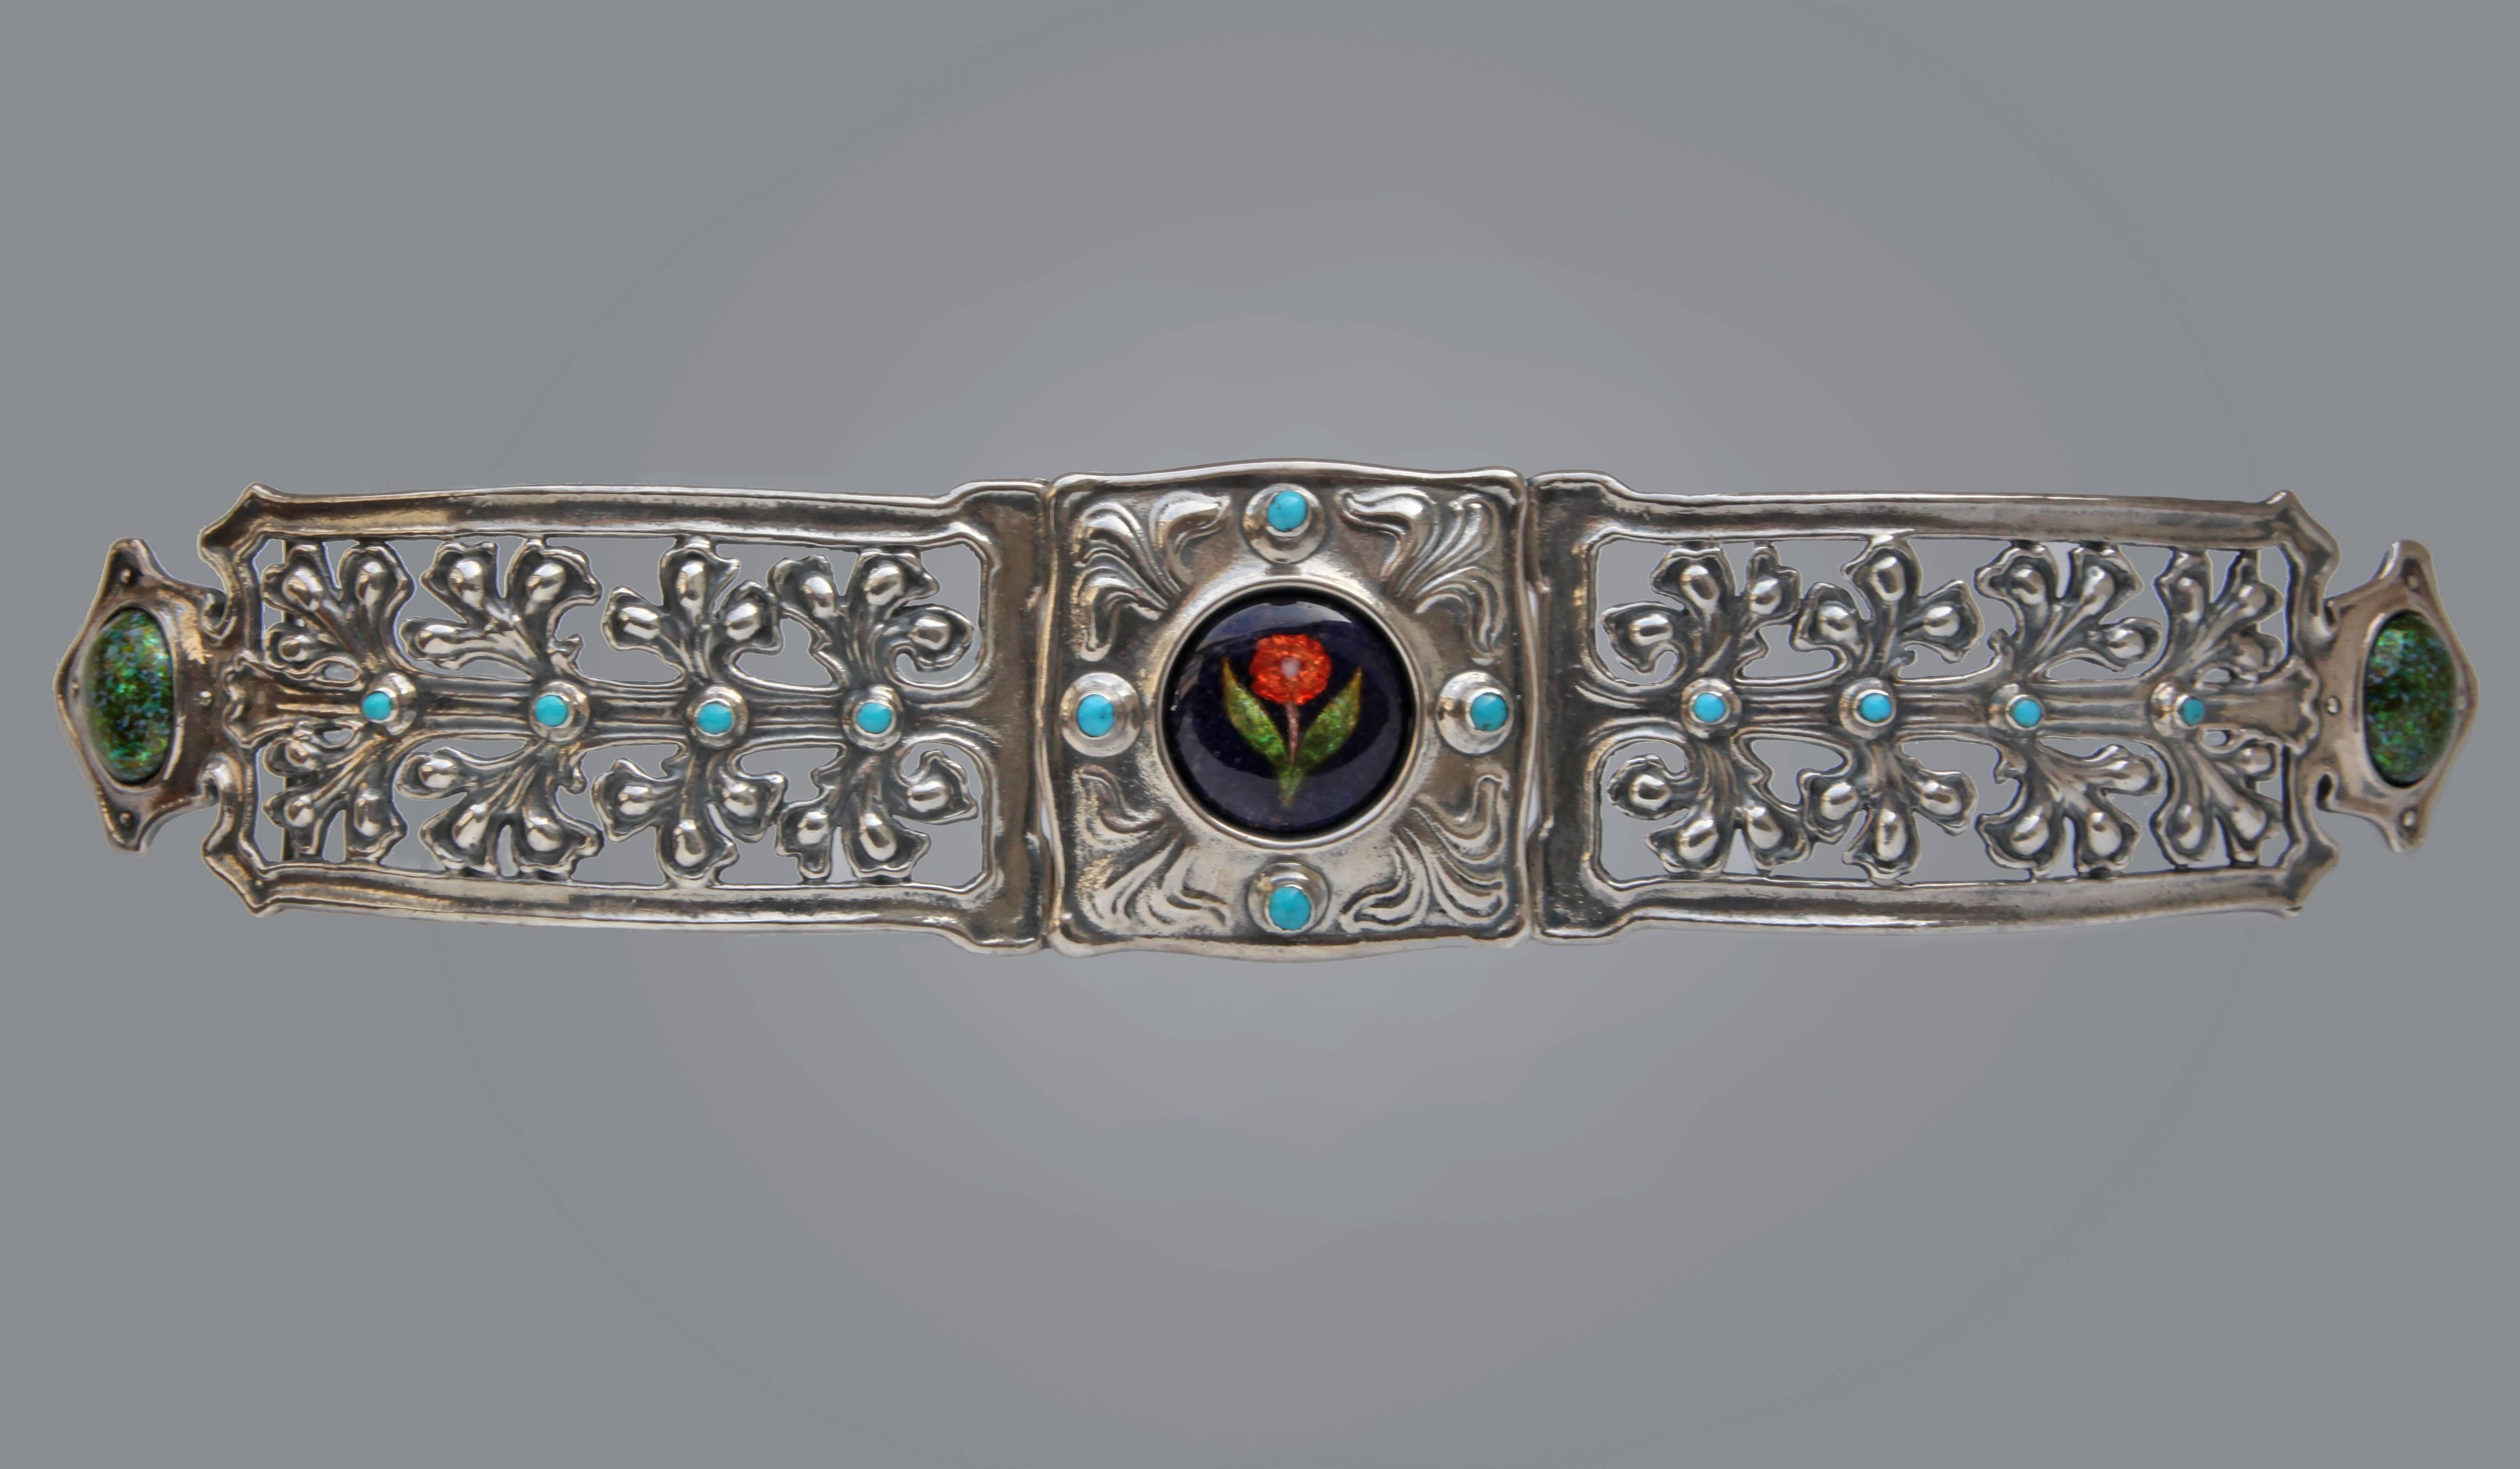 An important Arts & Crafts waist ornament by Nelson Dawson in silver, enamel & turquoise .
Signed verso: 'N.D'

